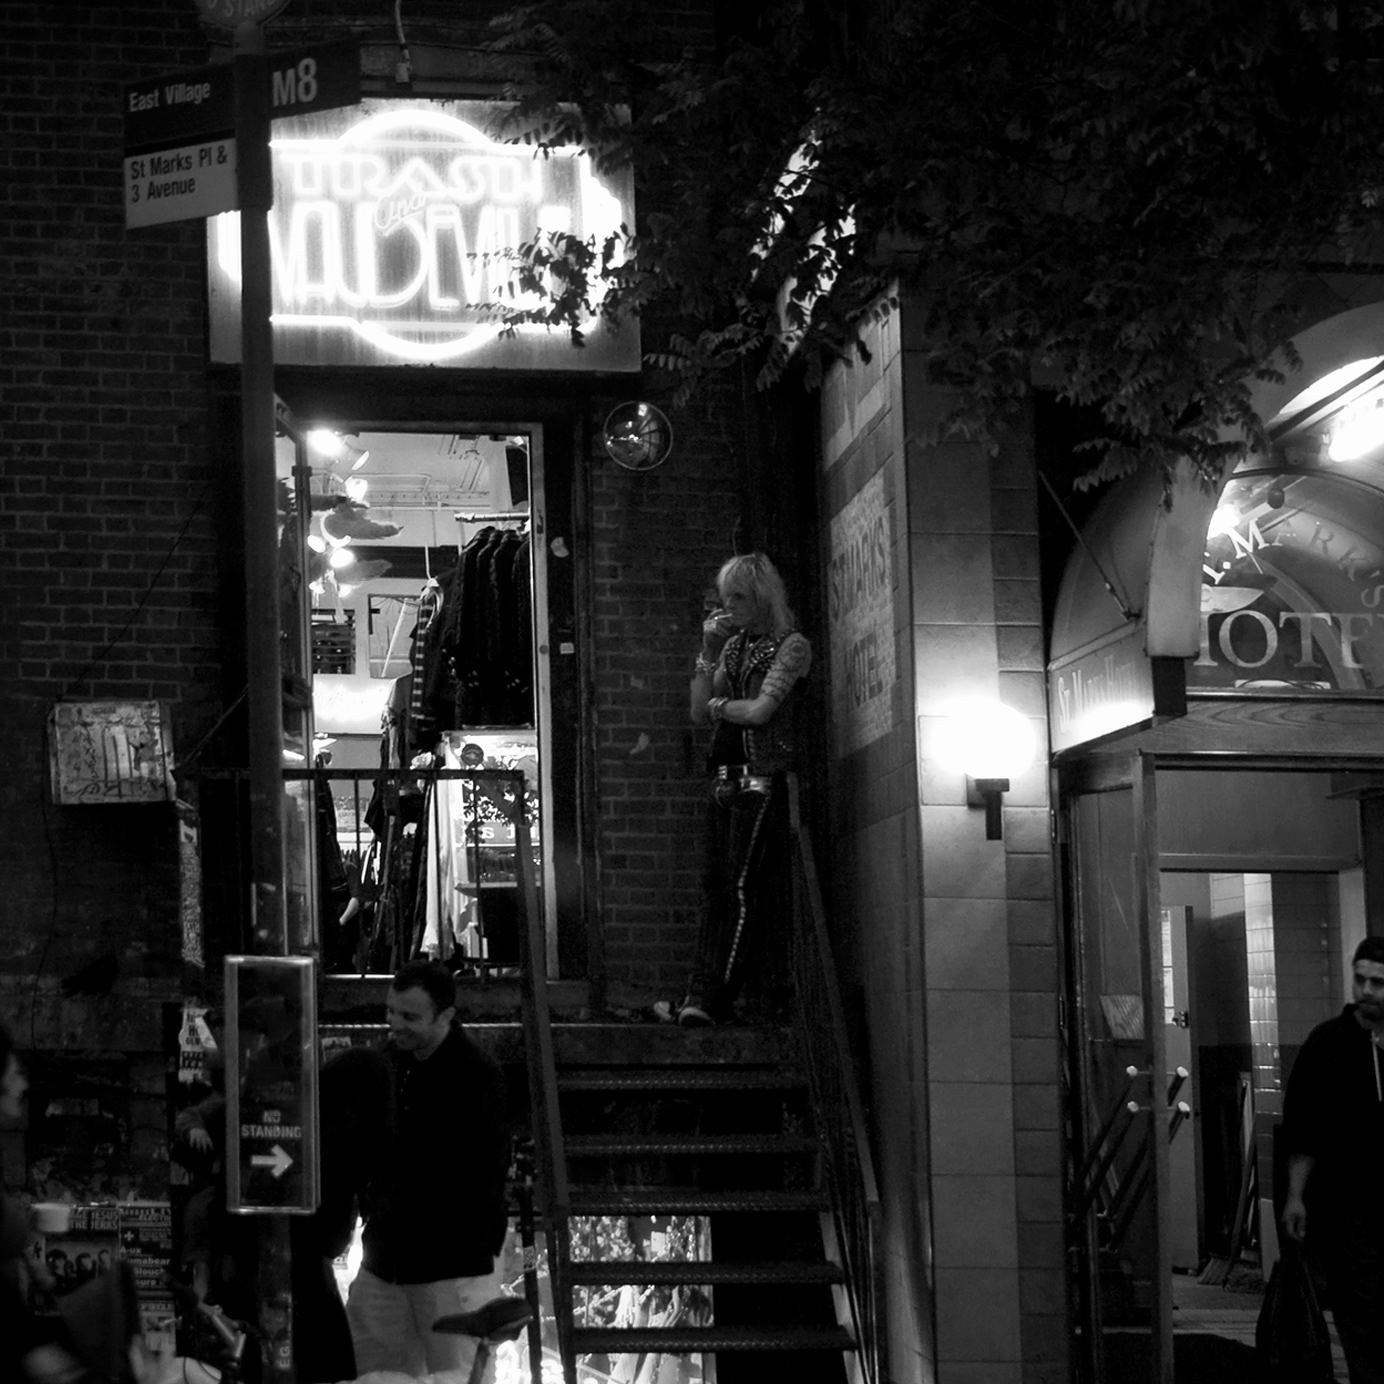 Because the Night Belongs to Realtors: The Death of NYC’s Rock Scene